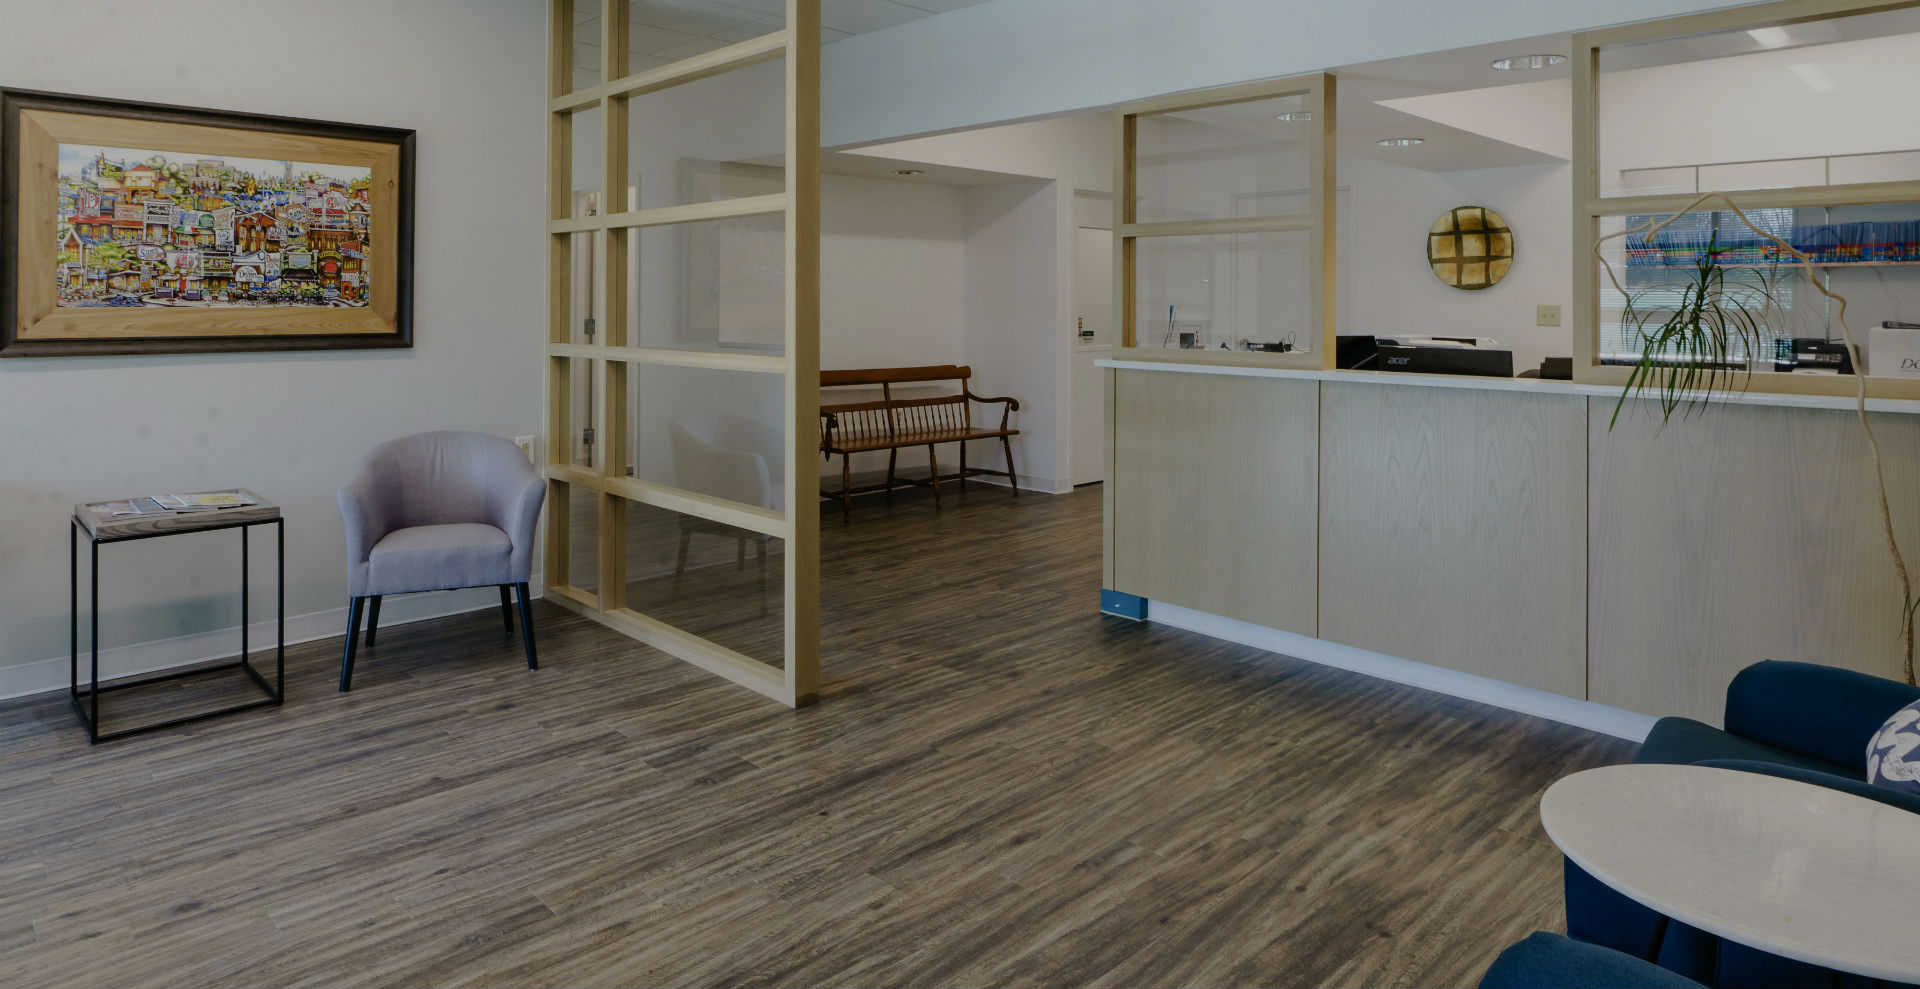 Lobby and waiting area at Durham DDS